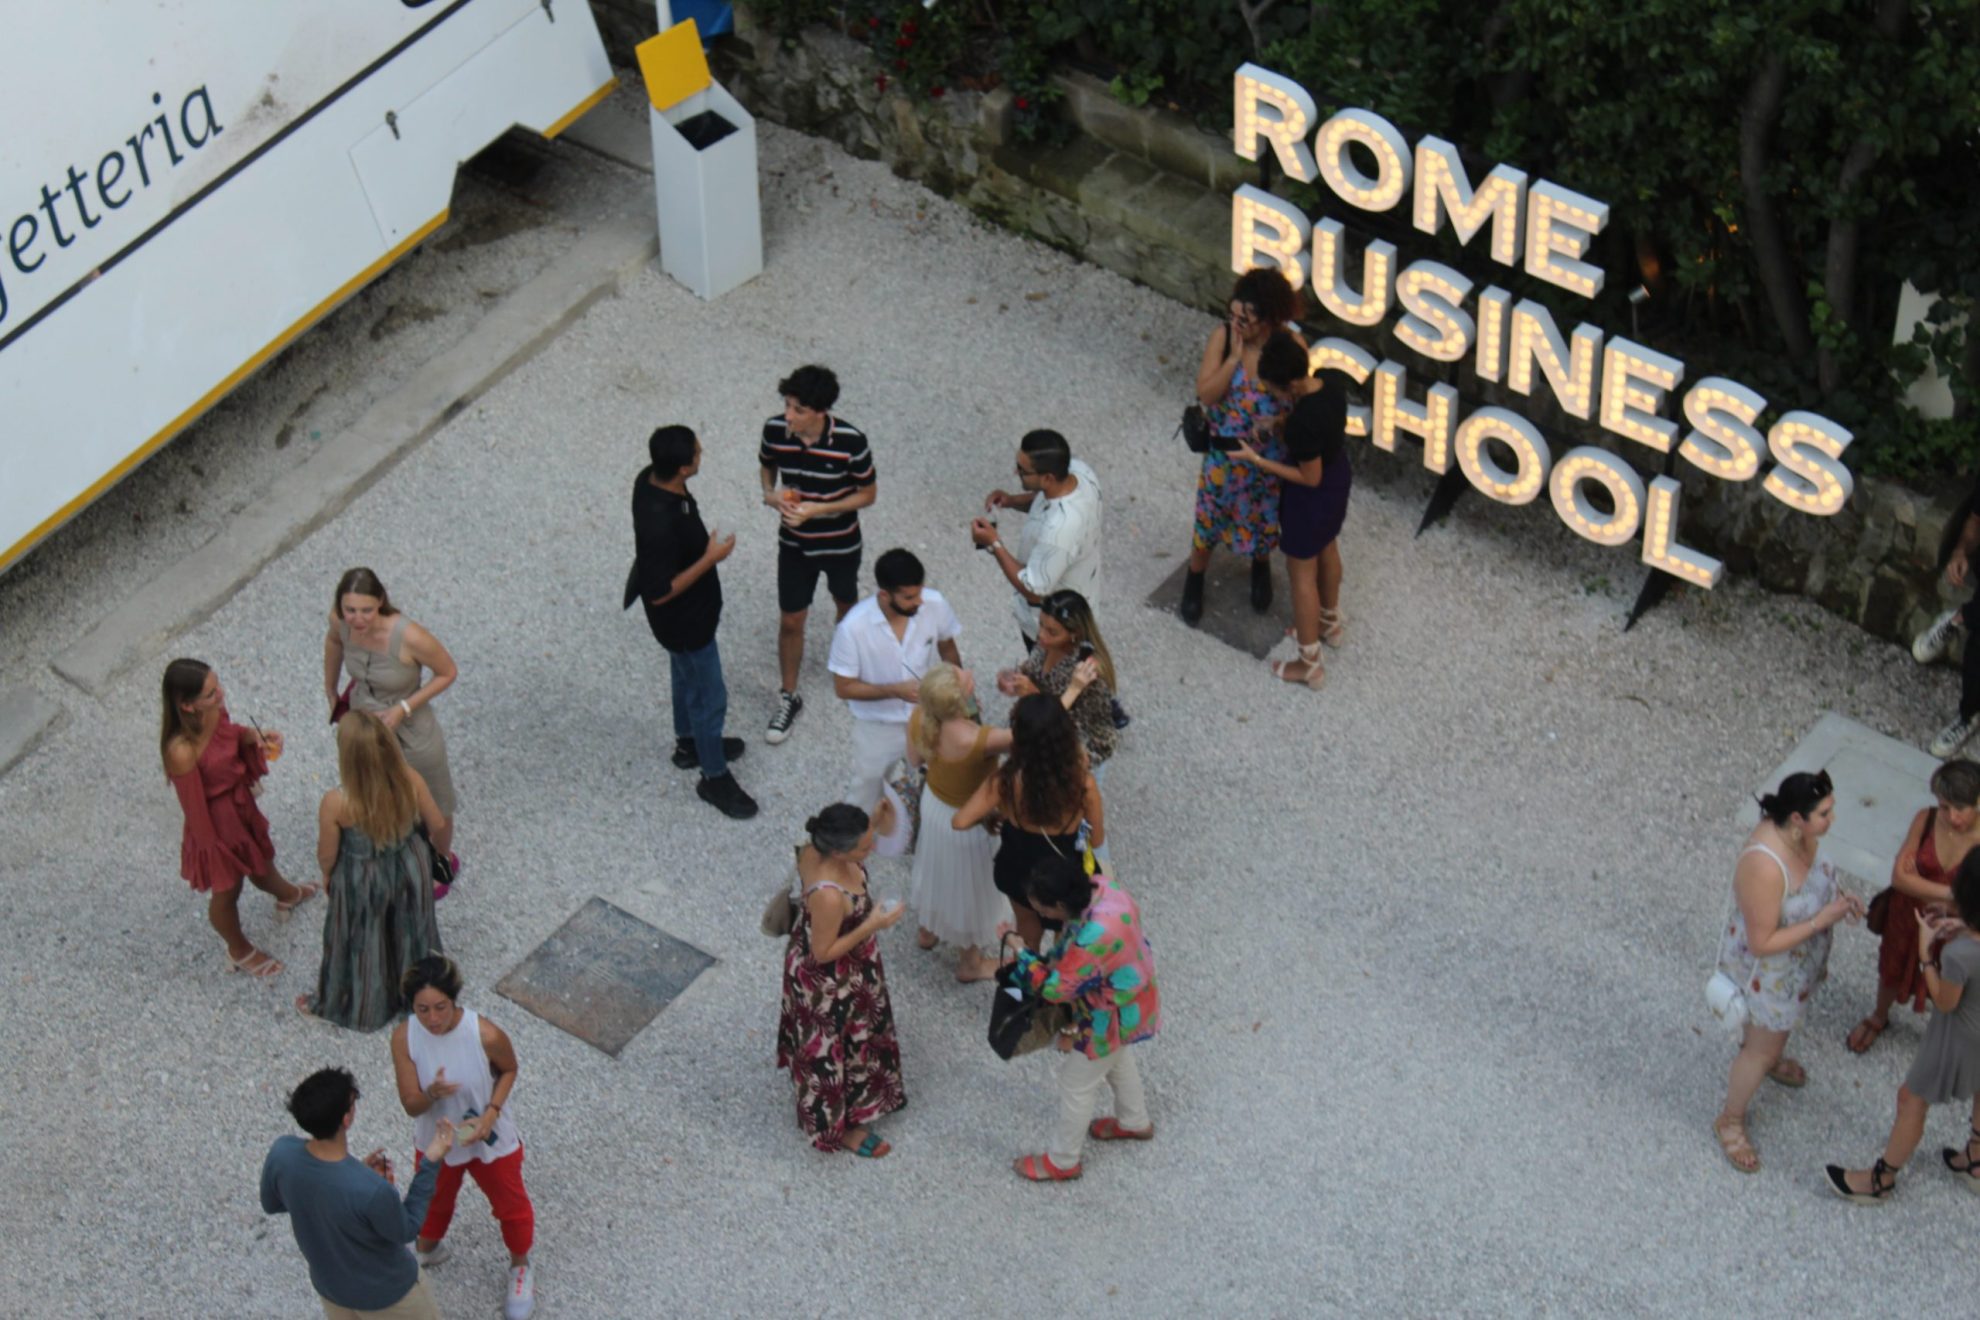 rome business school students networking in the garden